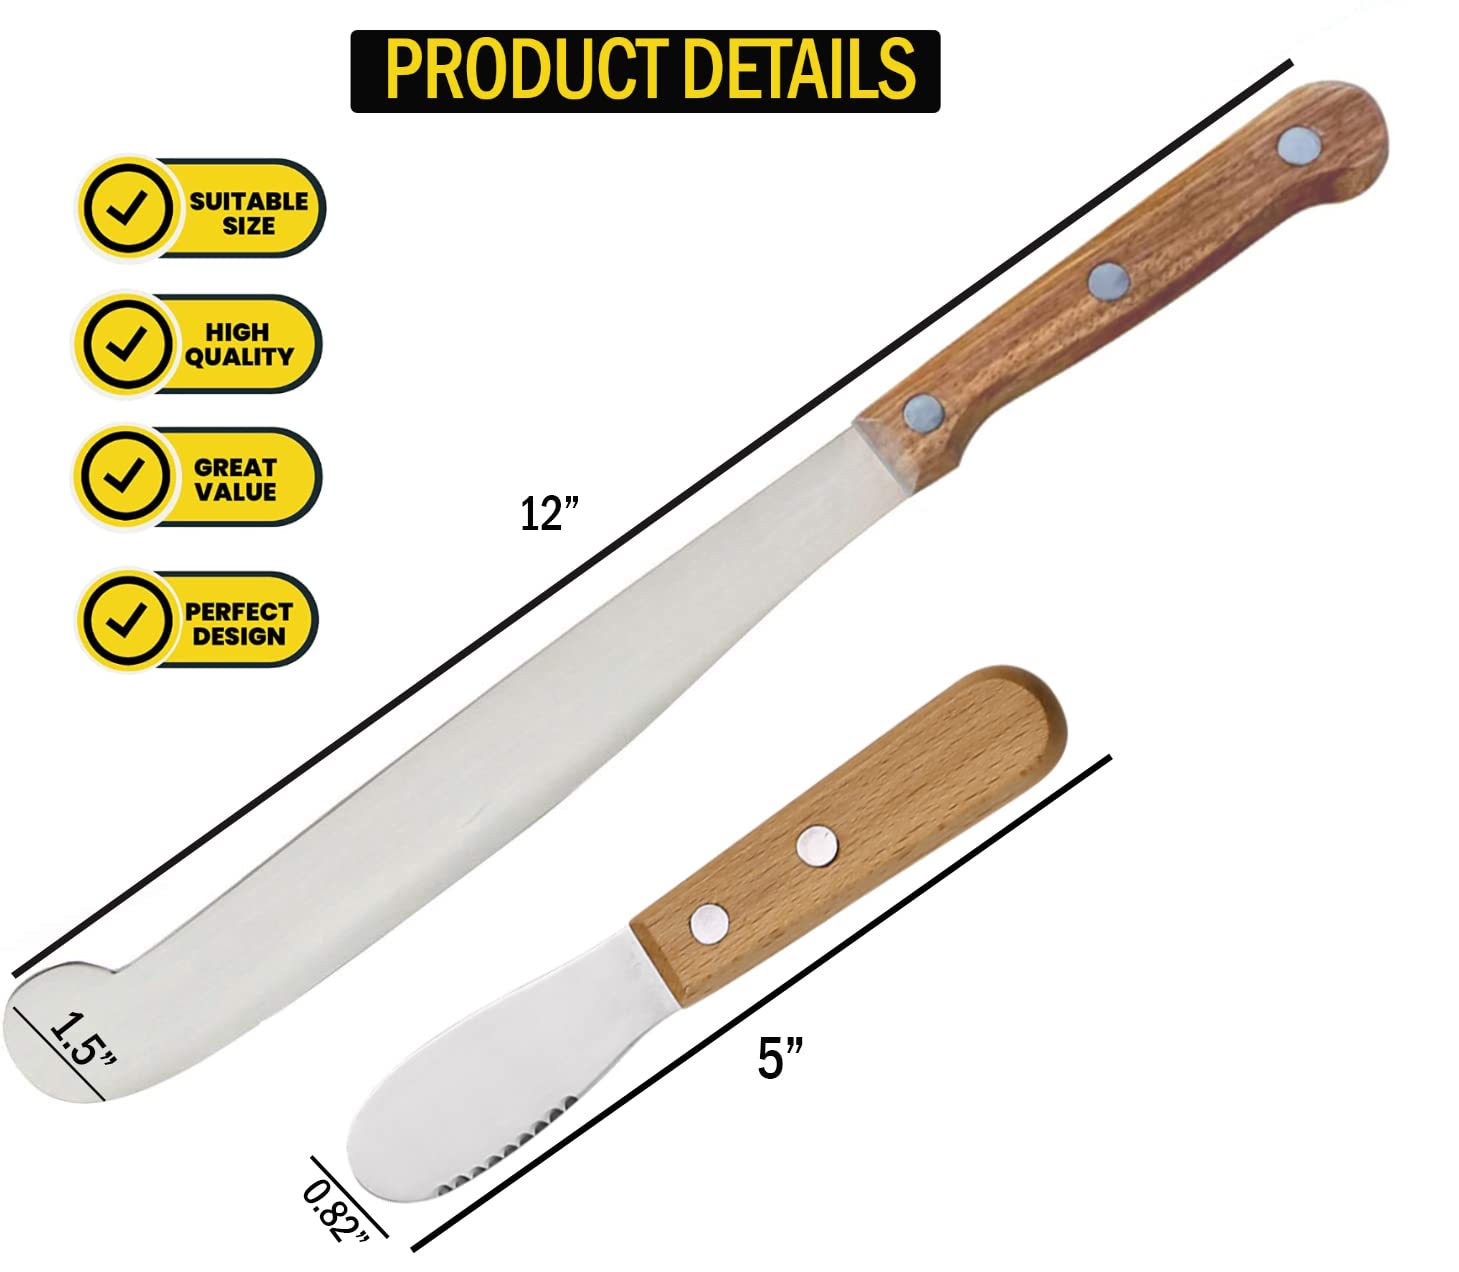 Performore 2PCS Spreader Knives, 12” Peanut Butter Knife that Works Great with Jars and 5” Short Spreading Knife, Stainless Steel Spatulas with Wooden Handle Spreader Set